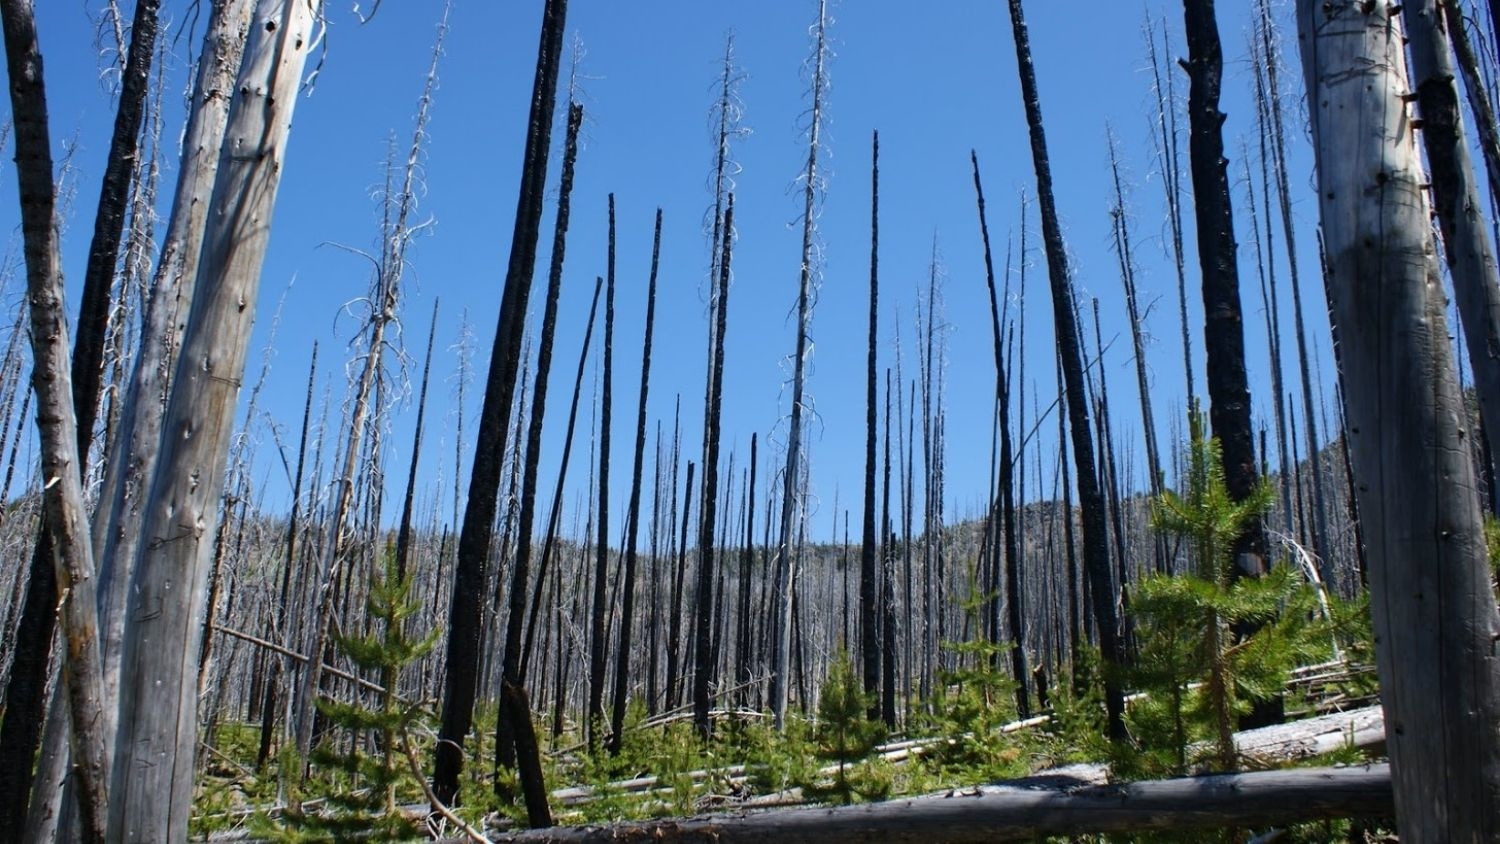 Forest in Oregon damaged by fire - Ecologist: People Should Prepare for Landscapes to Change -Forestry and Environmental Resources NC State University